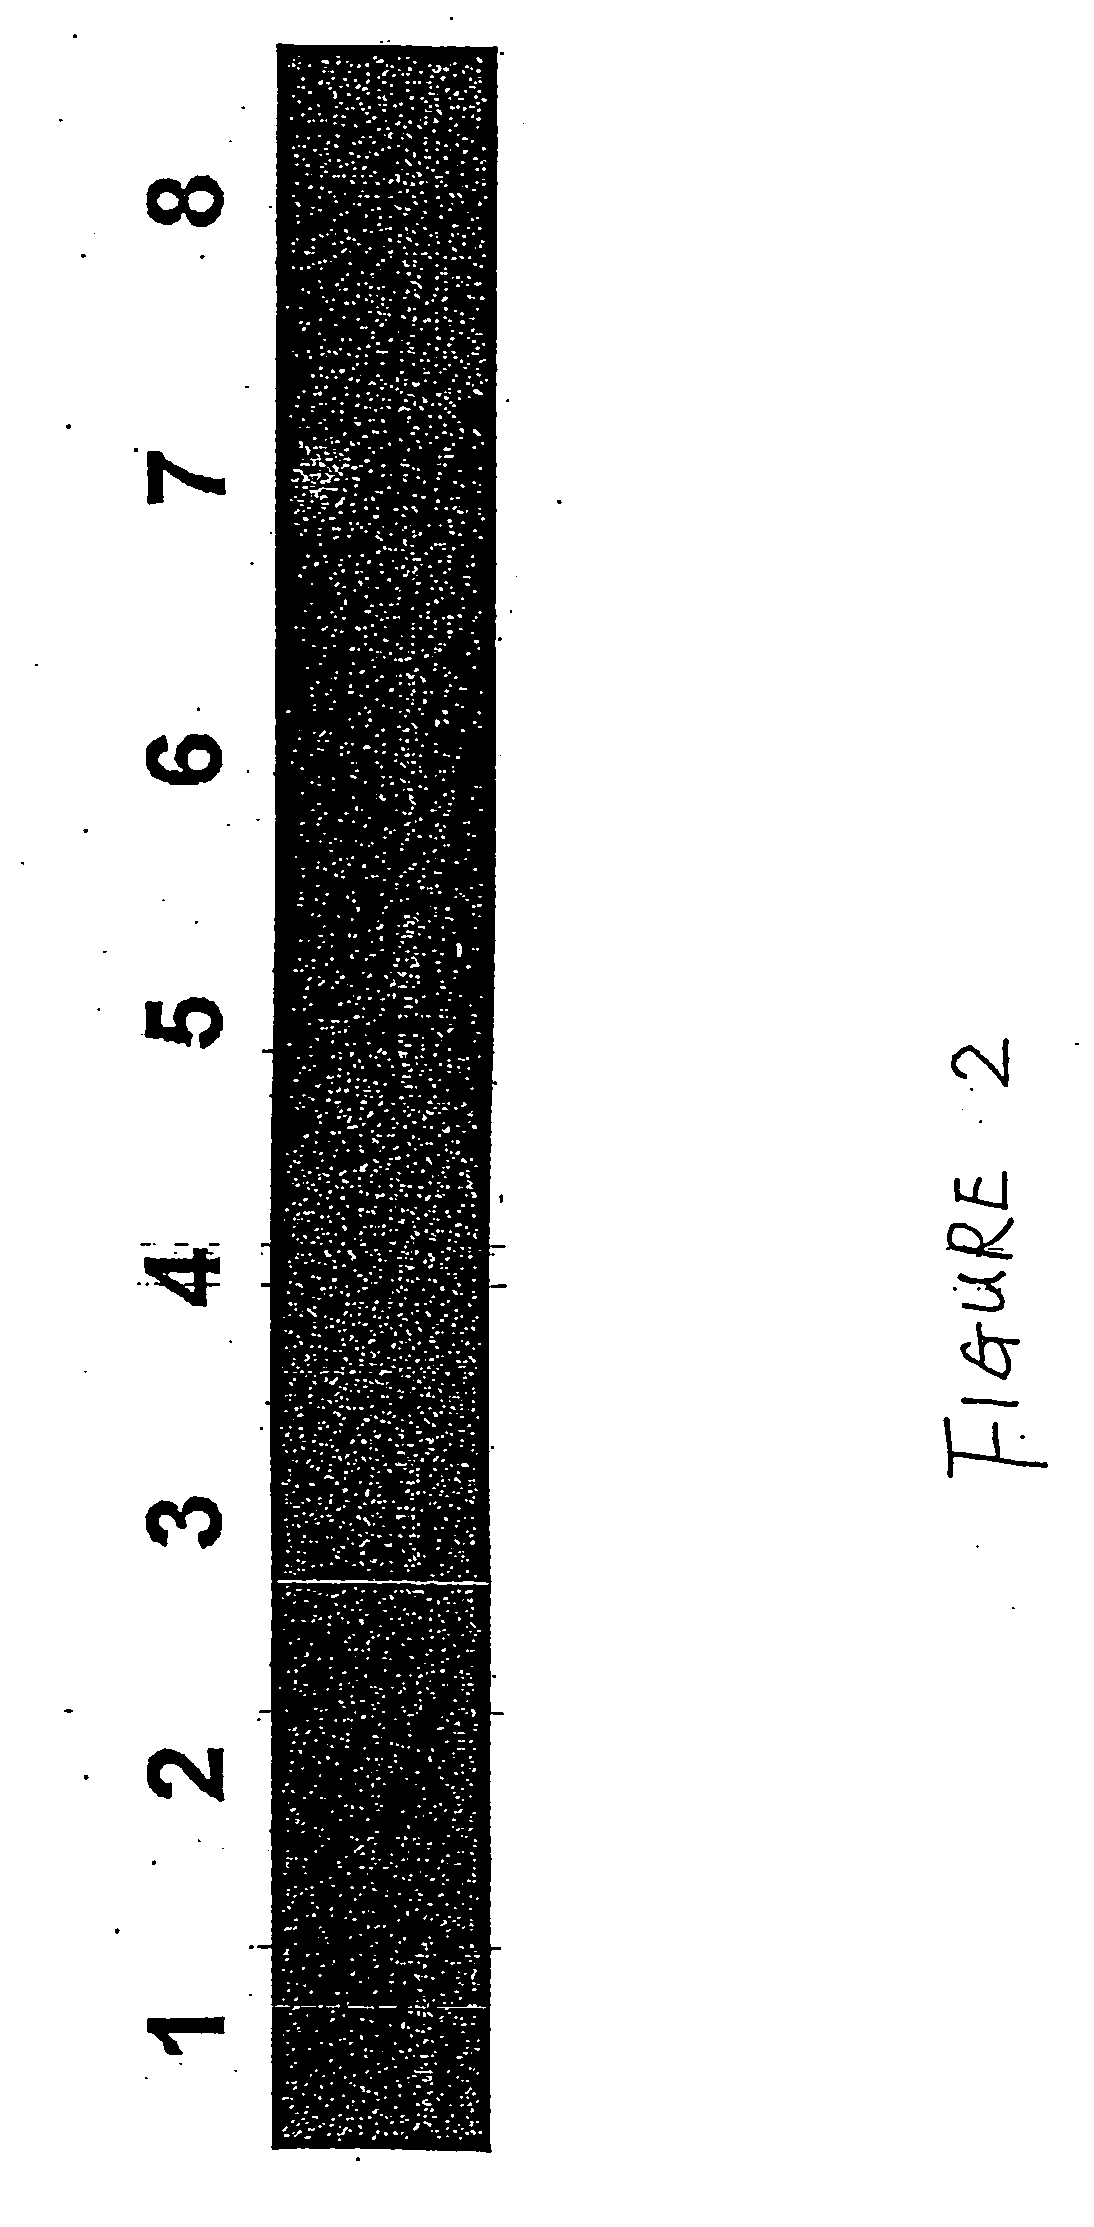 Method for the detection of schizophrenia related gene transcripts in blood